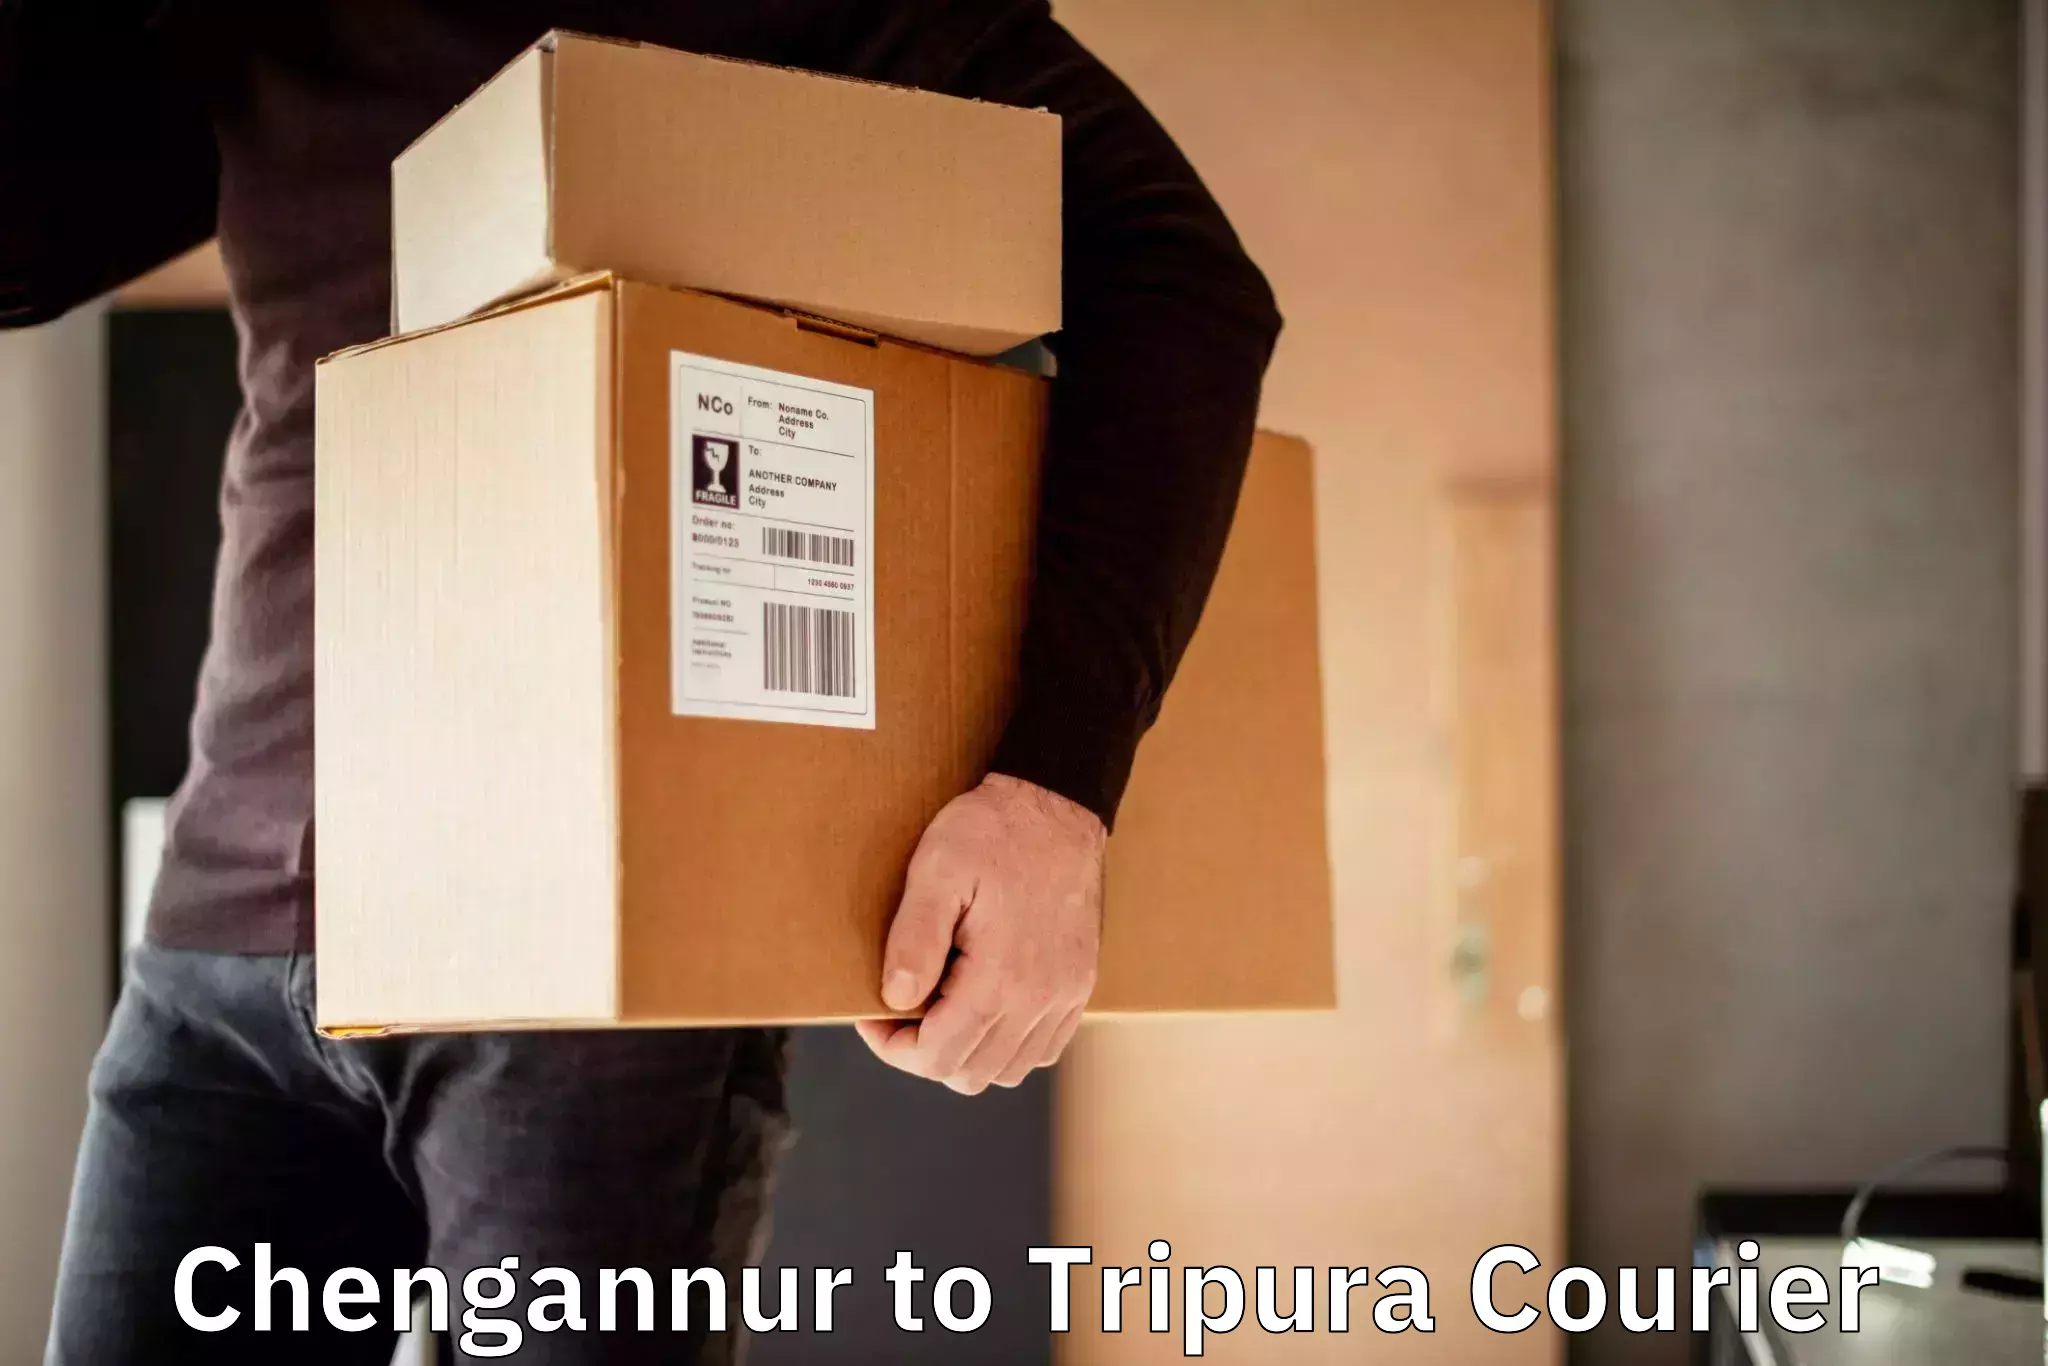 Customizable delivery plans Chengannur to Udaipur Tripura